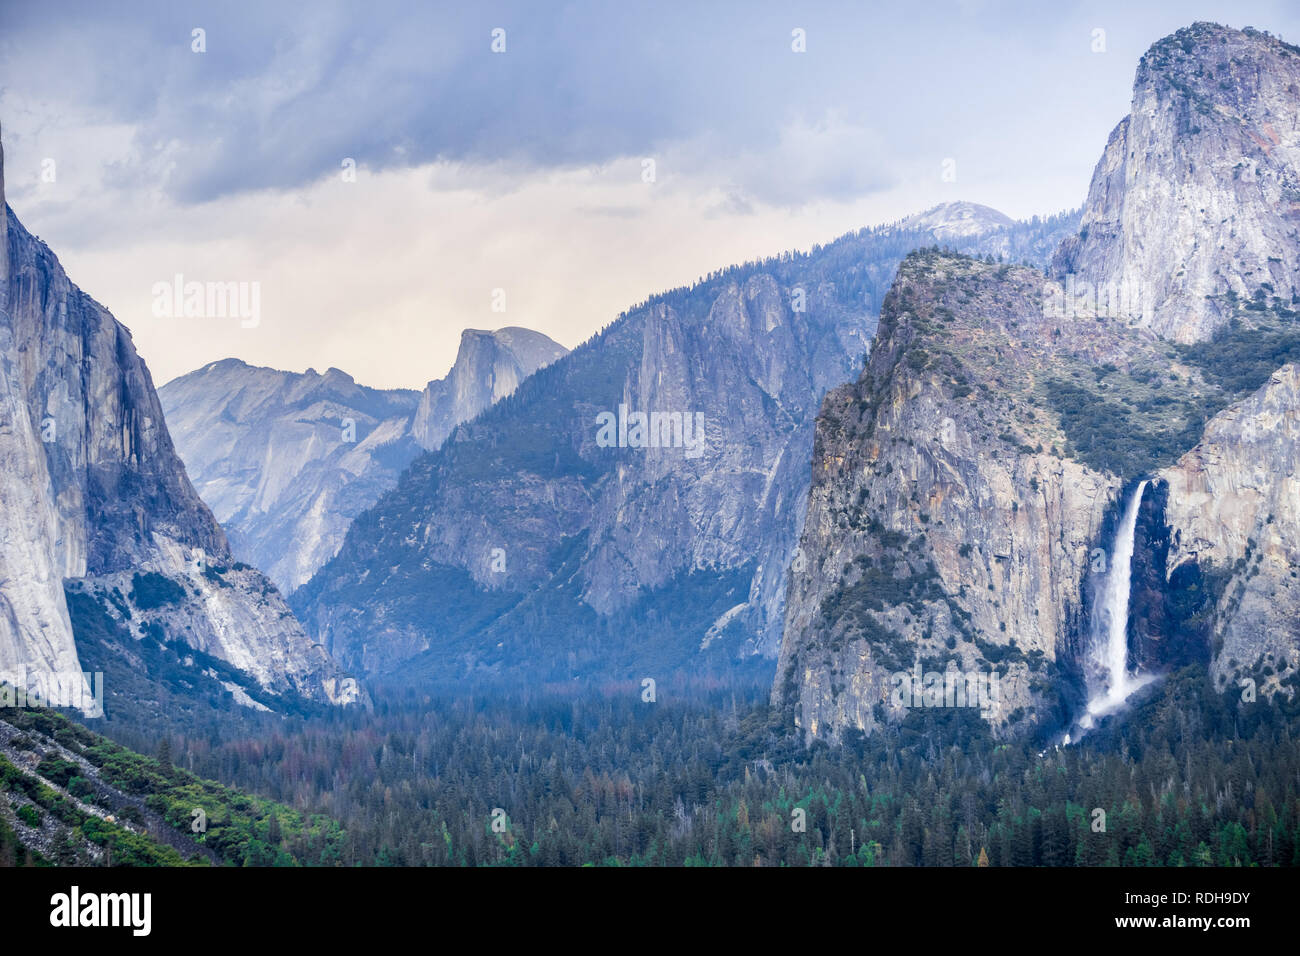 Bridalveil Falls and Yosemite Valley as seen from Tunnel View vista point on a rainy summer day, Yosemite National Park, California Stock Photo